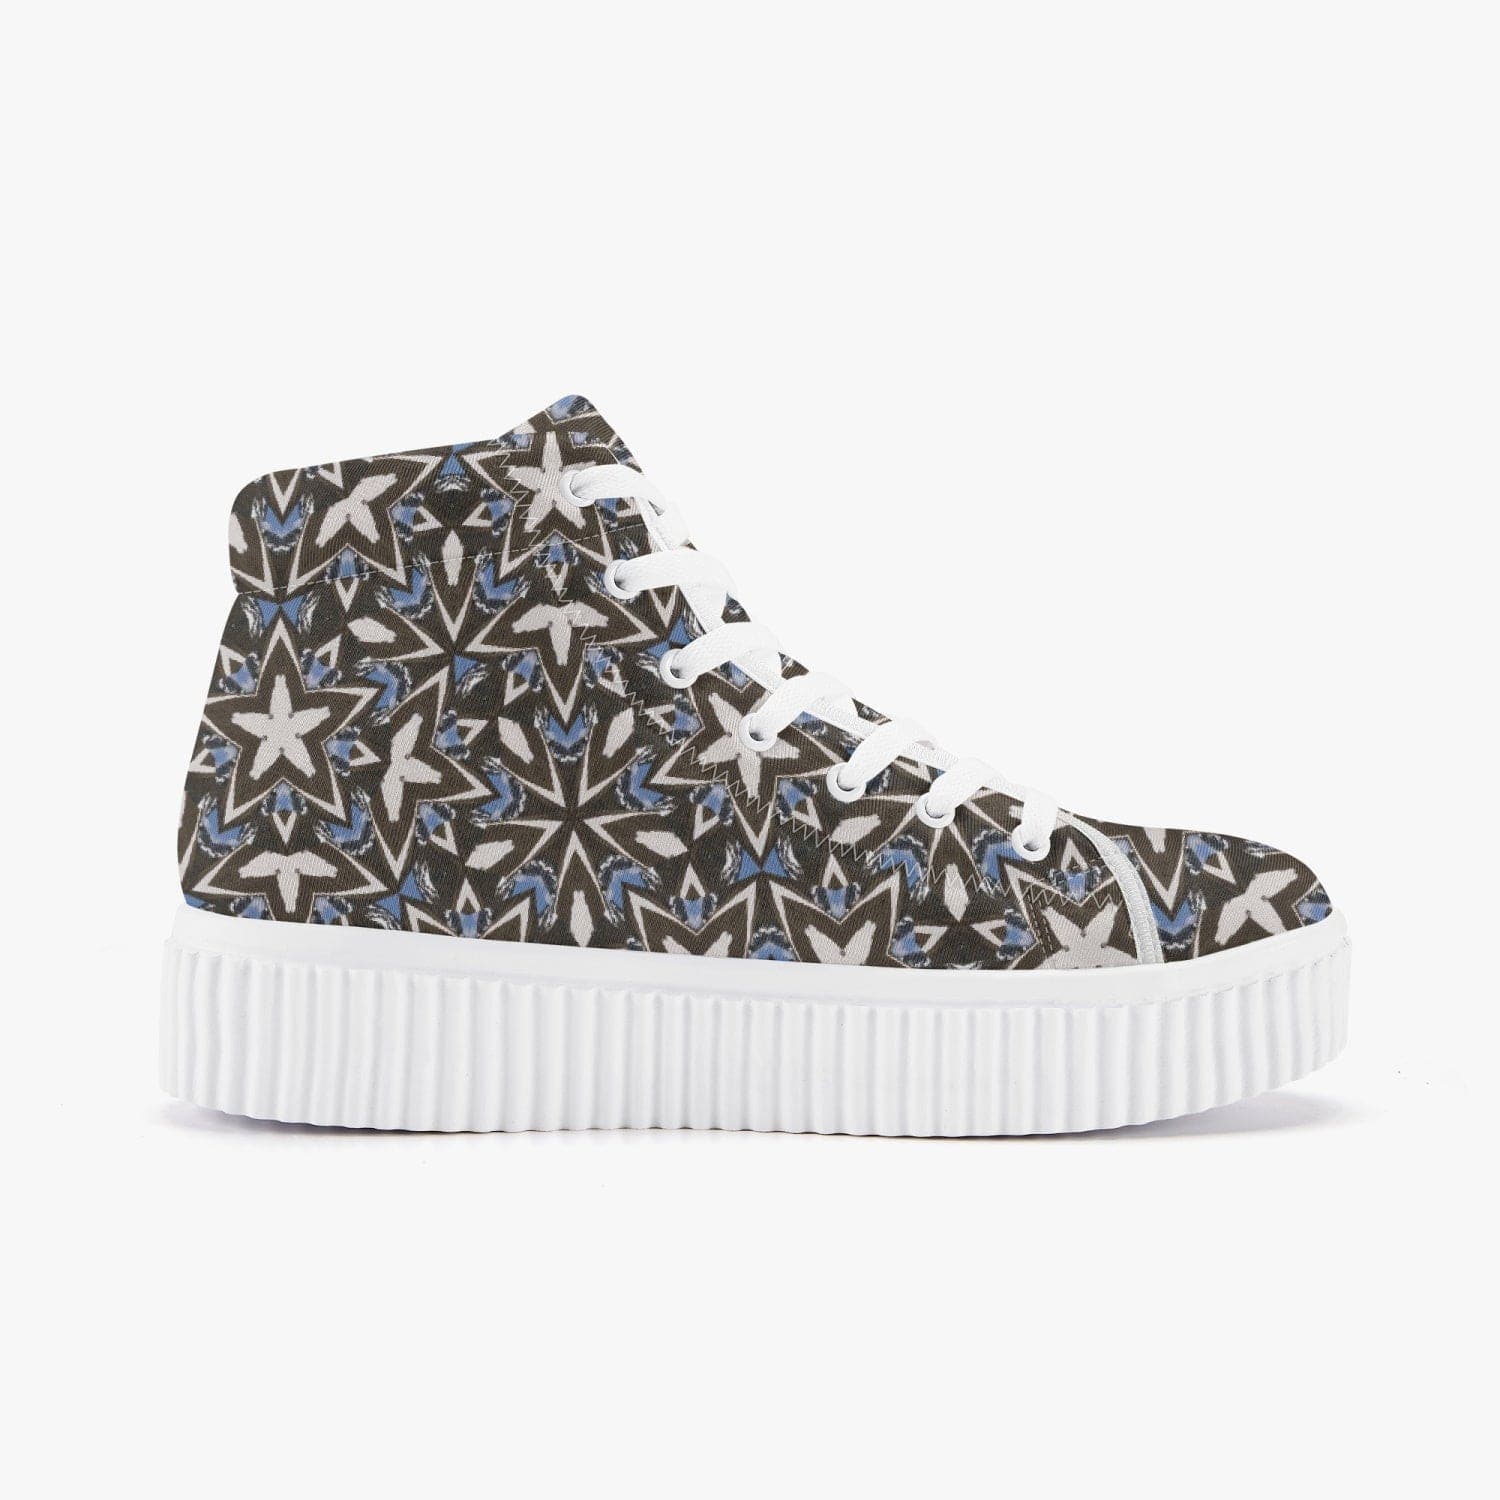 Mountain and sky patterned  Women’s High Top Hot Trendy  Platform Sneakers, designed by Sensus Studio Design